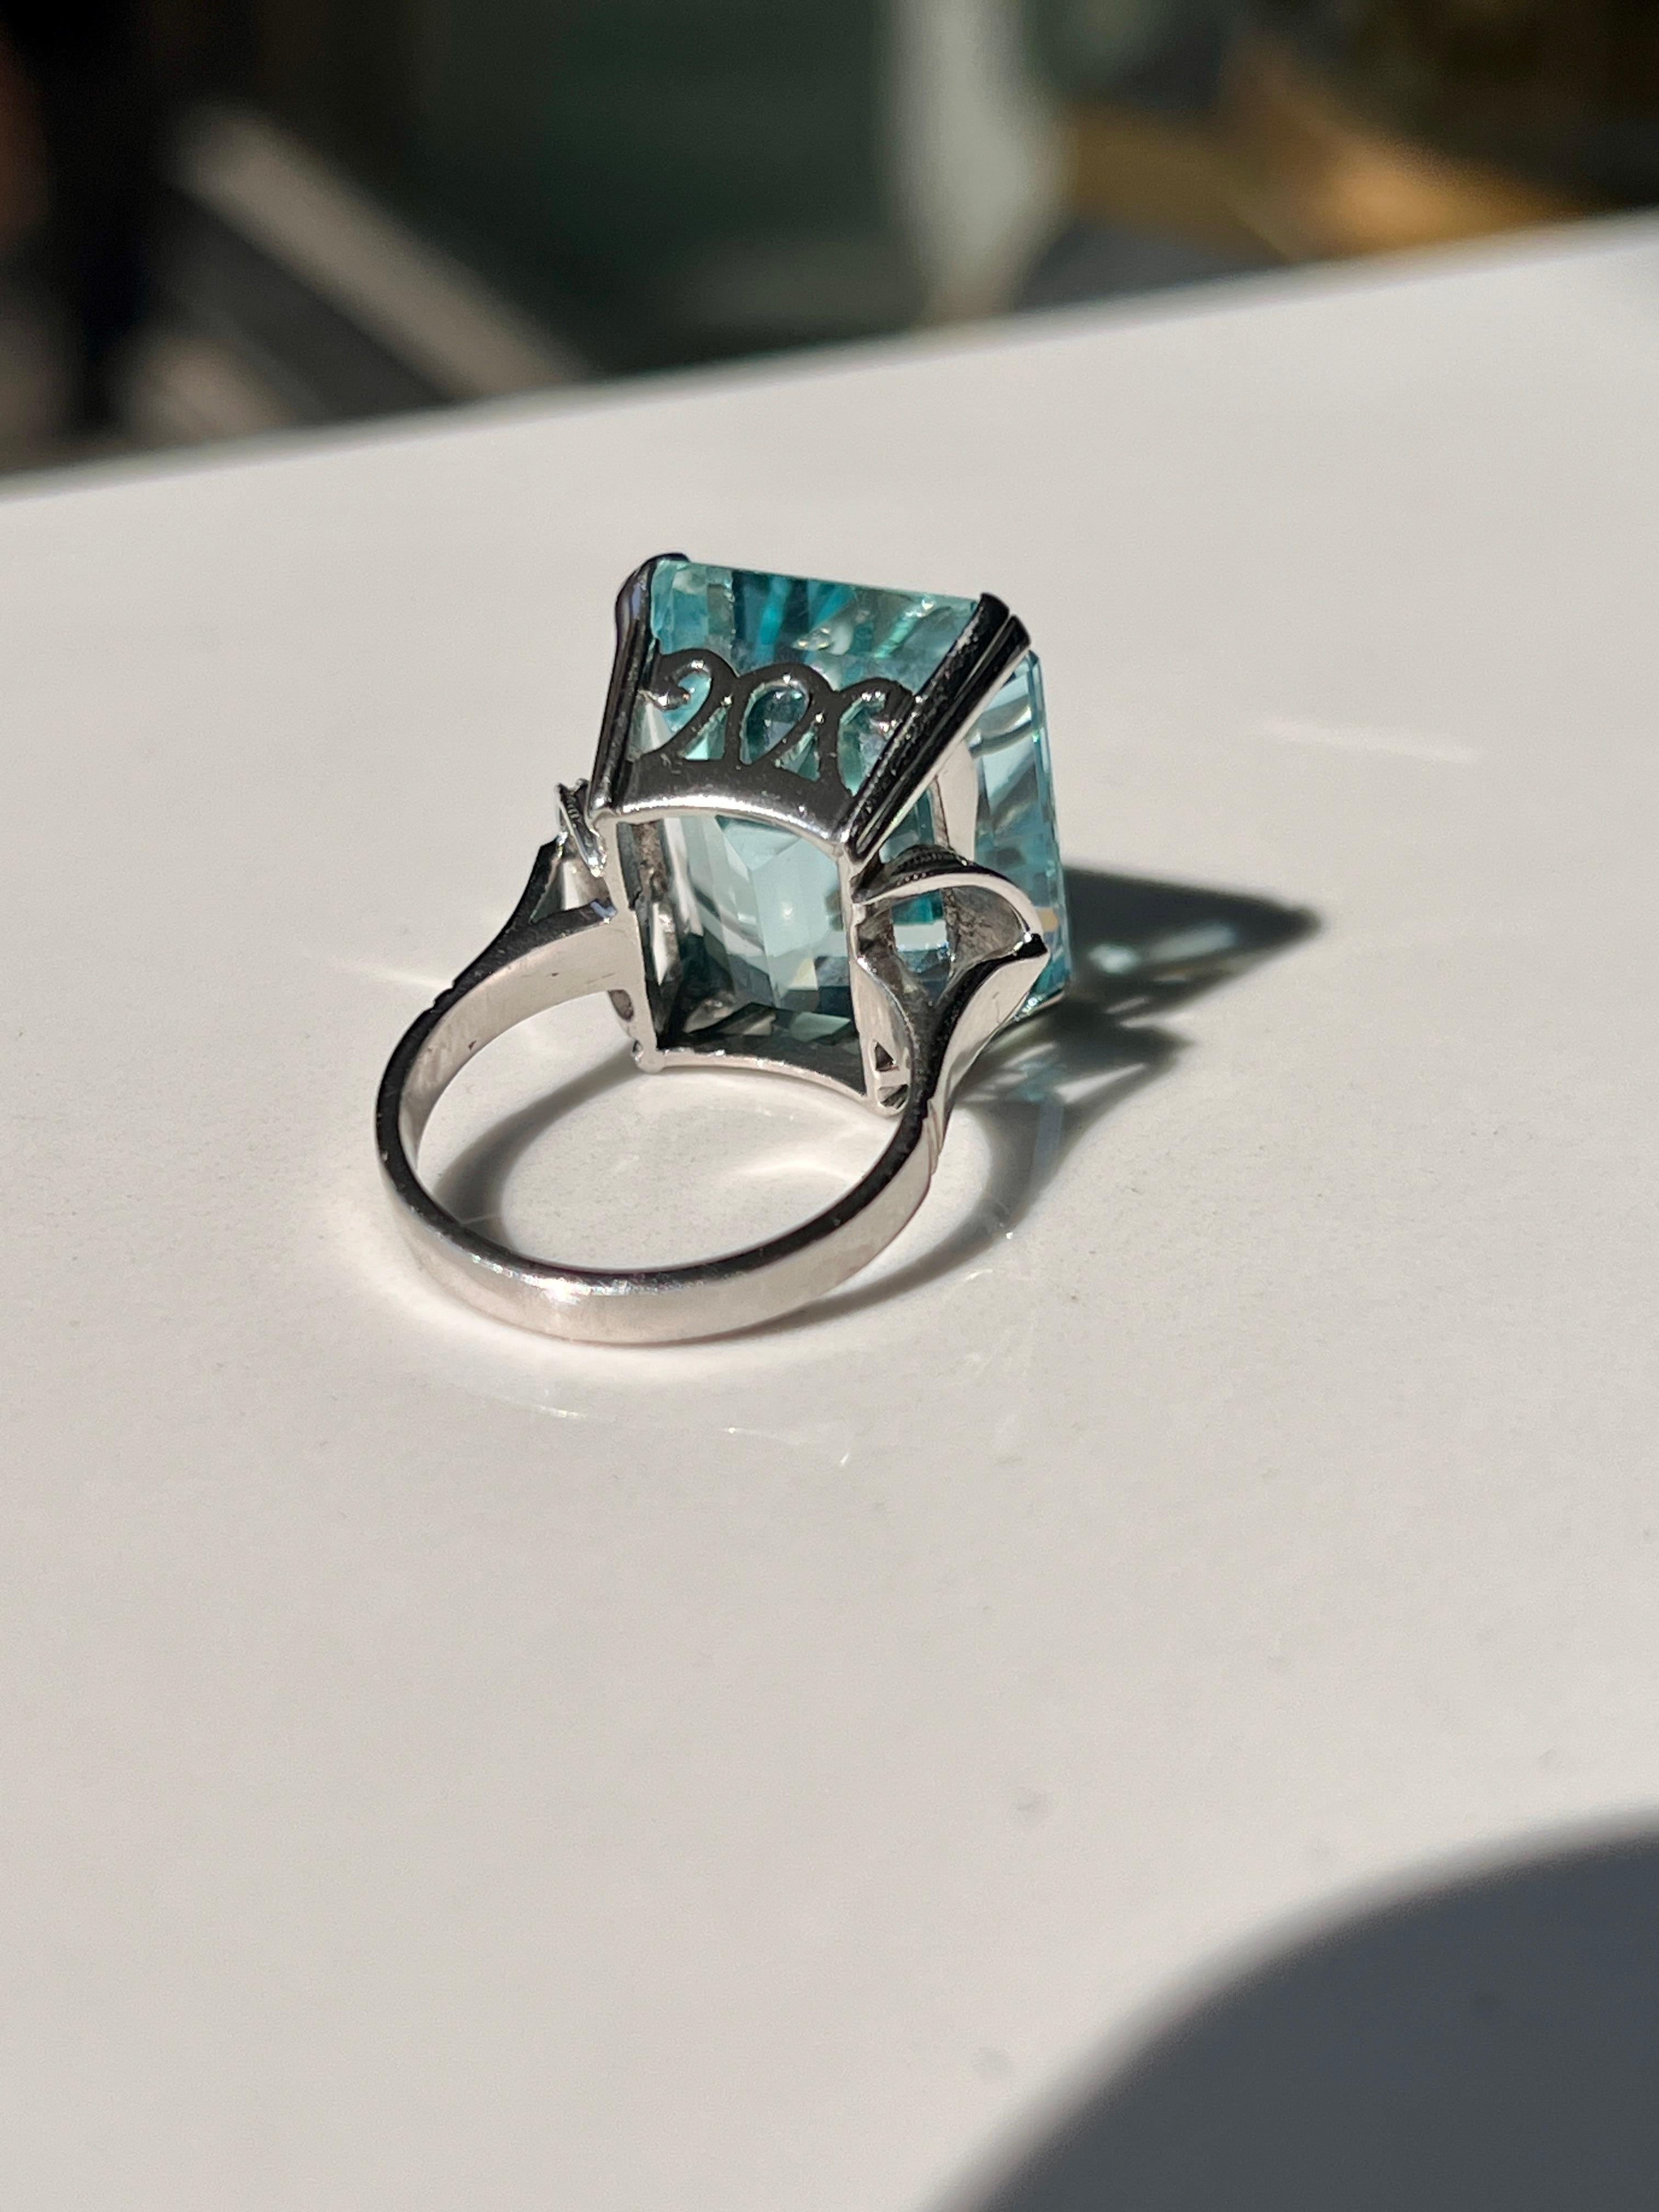 25.3ct GIA Certified Aquamarine Cocktail Ring For Sale 2